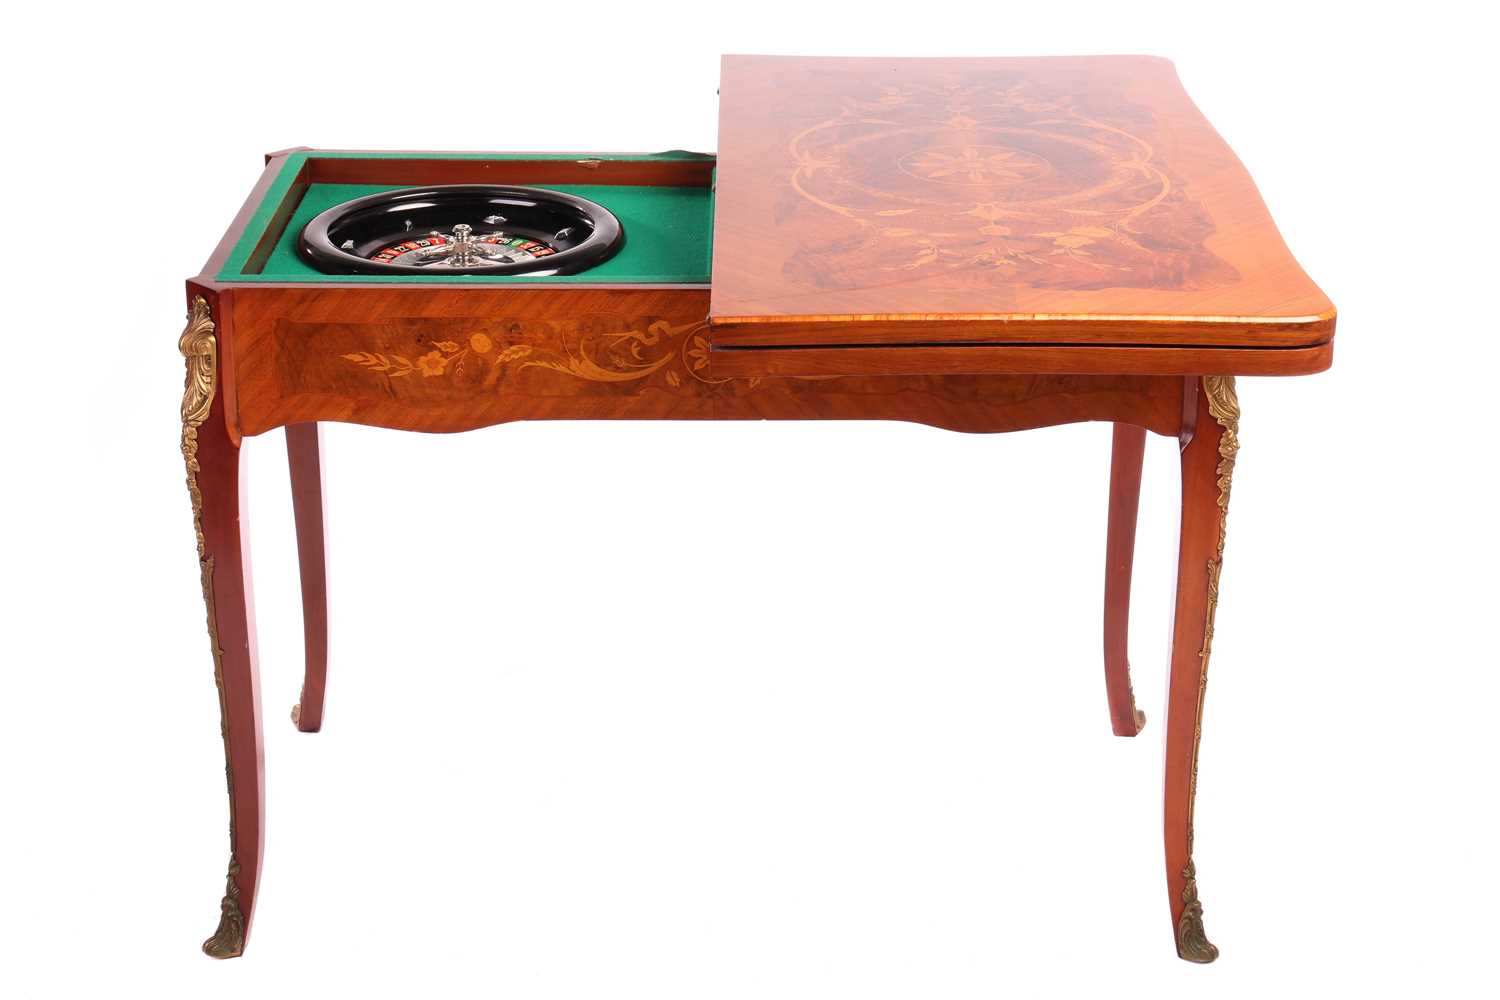 An Italian Dal Negro walnut and marquetry gaming/roulette table, and gaming compendium the fold over